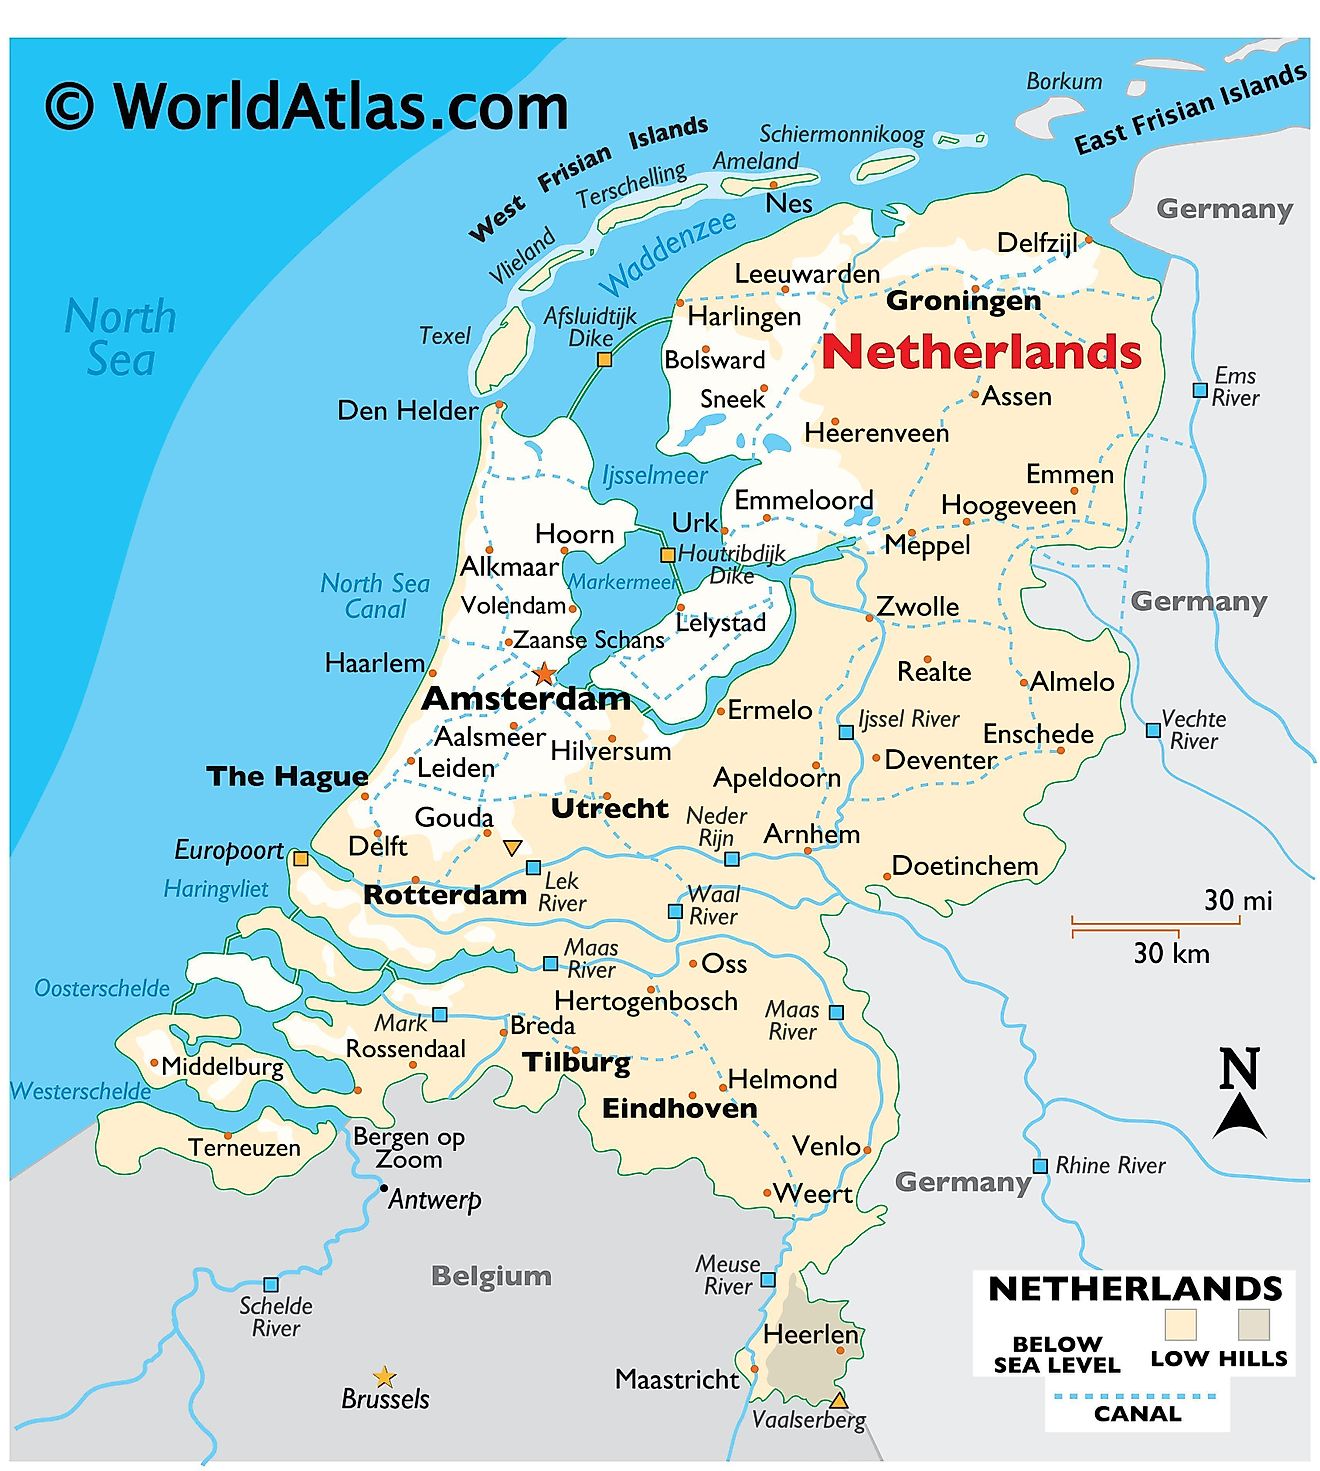 The Netherlands Maps & Facts - World Atlas